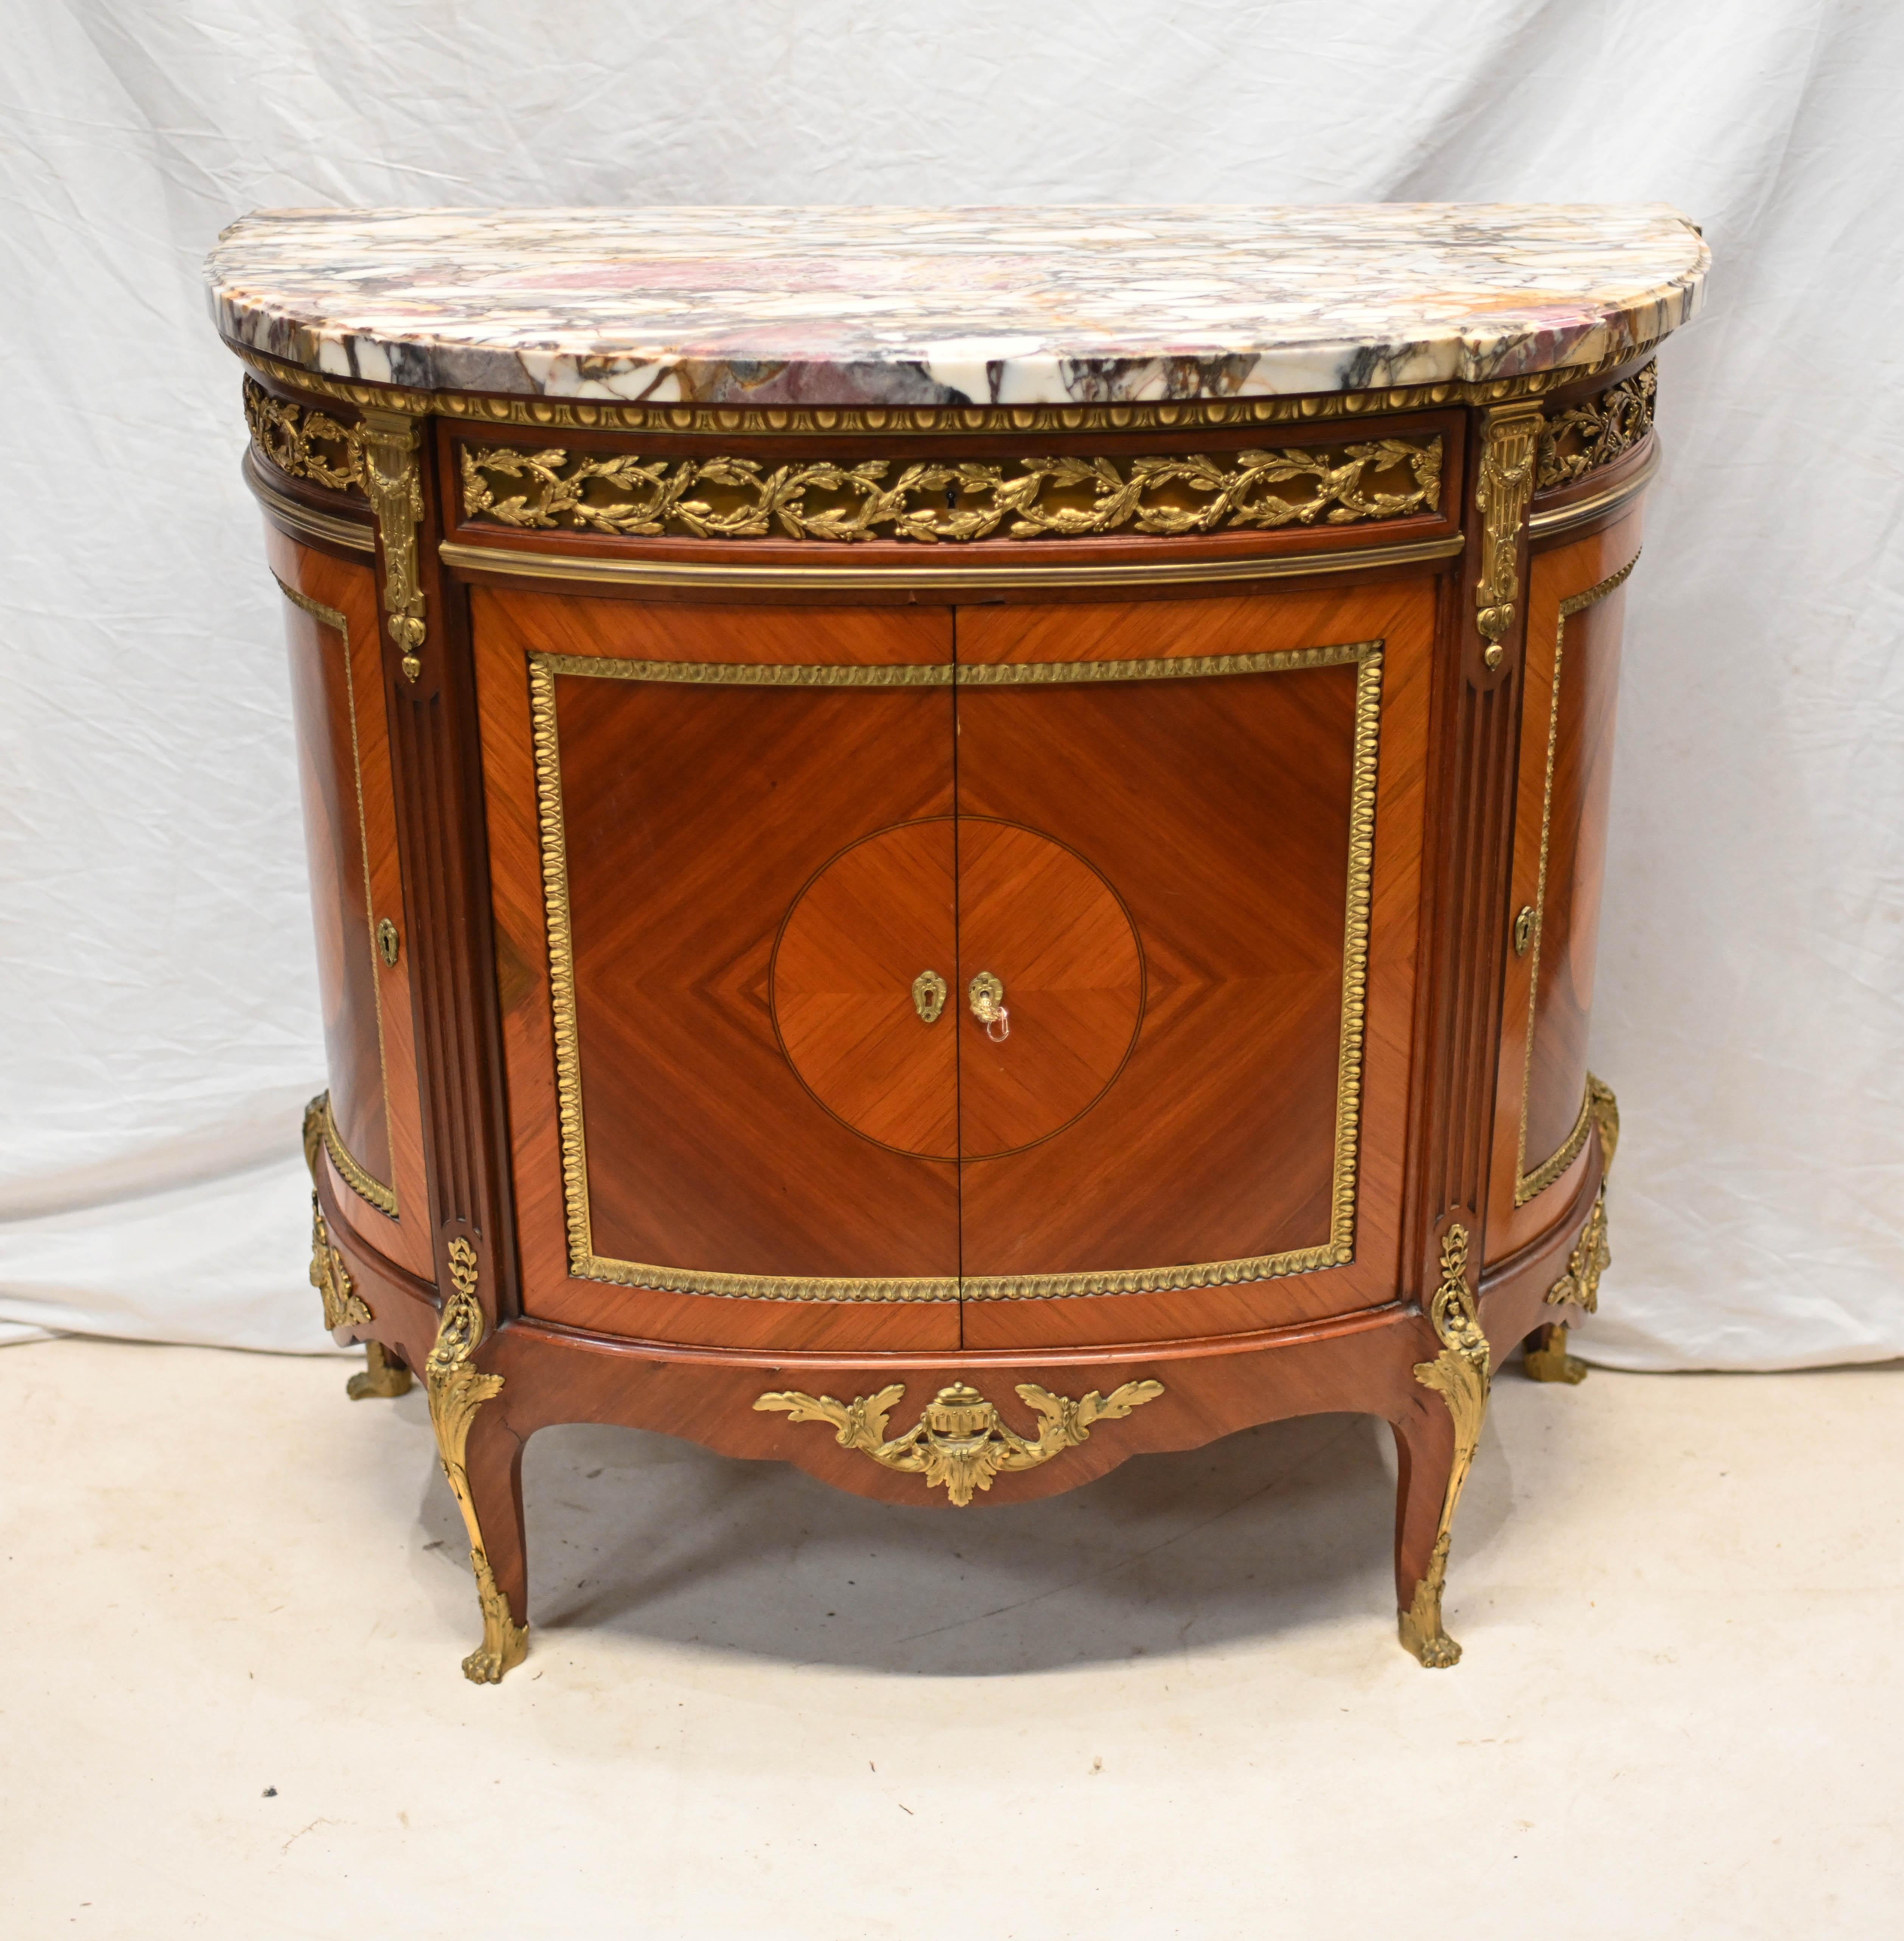 You are viewing a gorgeous French antique commode of demi lune form
Top quality demi lune side cabinet with king wood inlays and crossbanded rose wood
The fine quality ormolu mounts are tastefully gilded and original
Marble top is smooth and chip